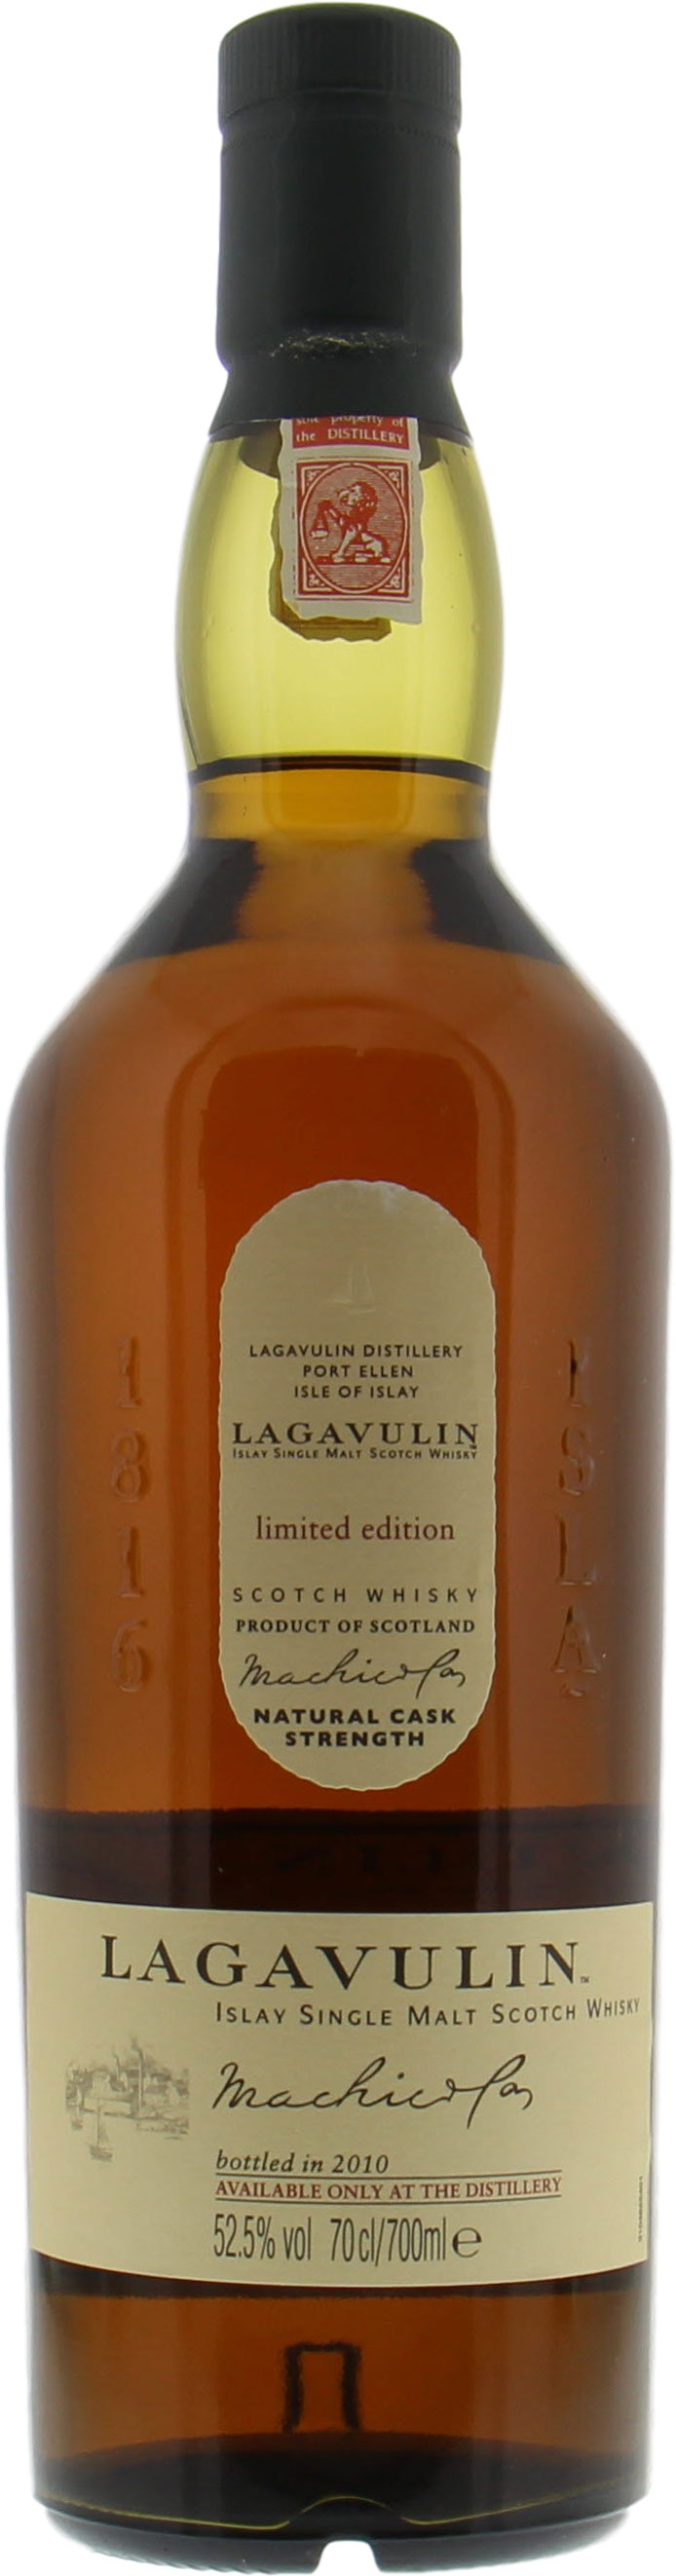 Lagavulin - Only Available At Distillery 2010  52.5% NV Perfect 10001